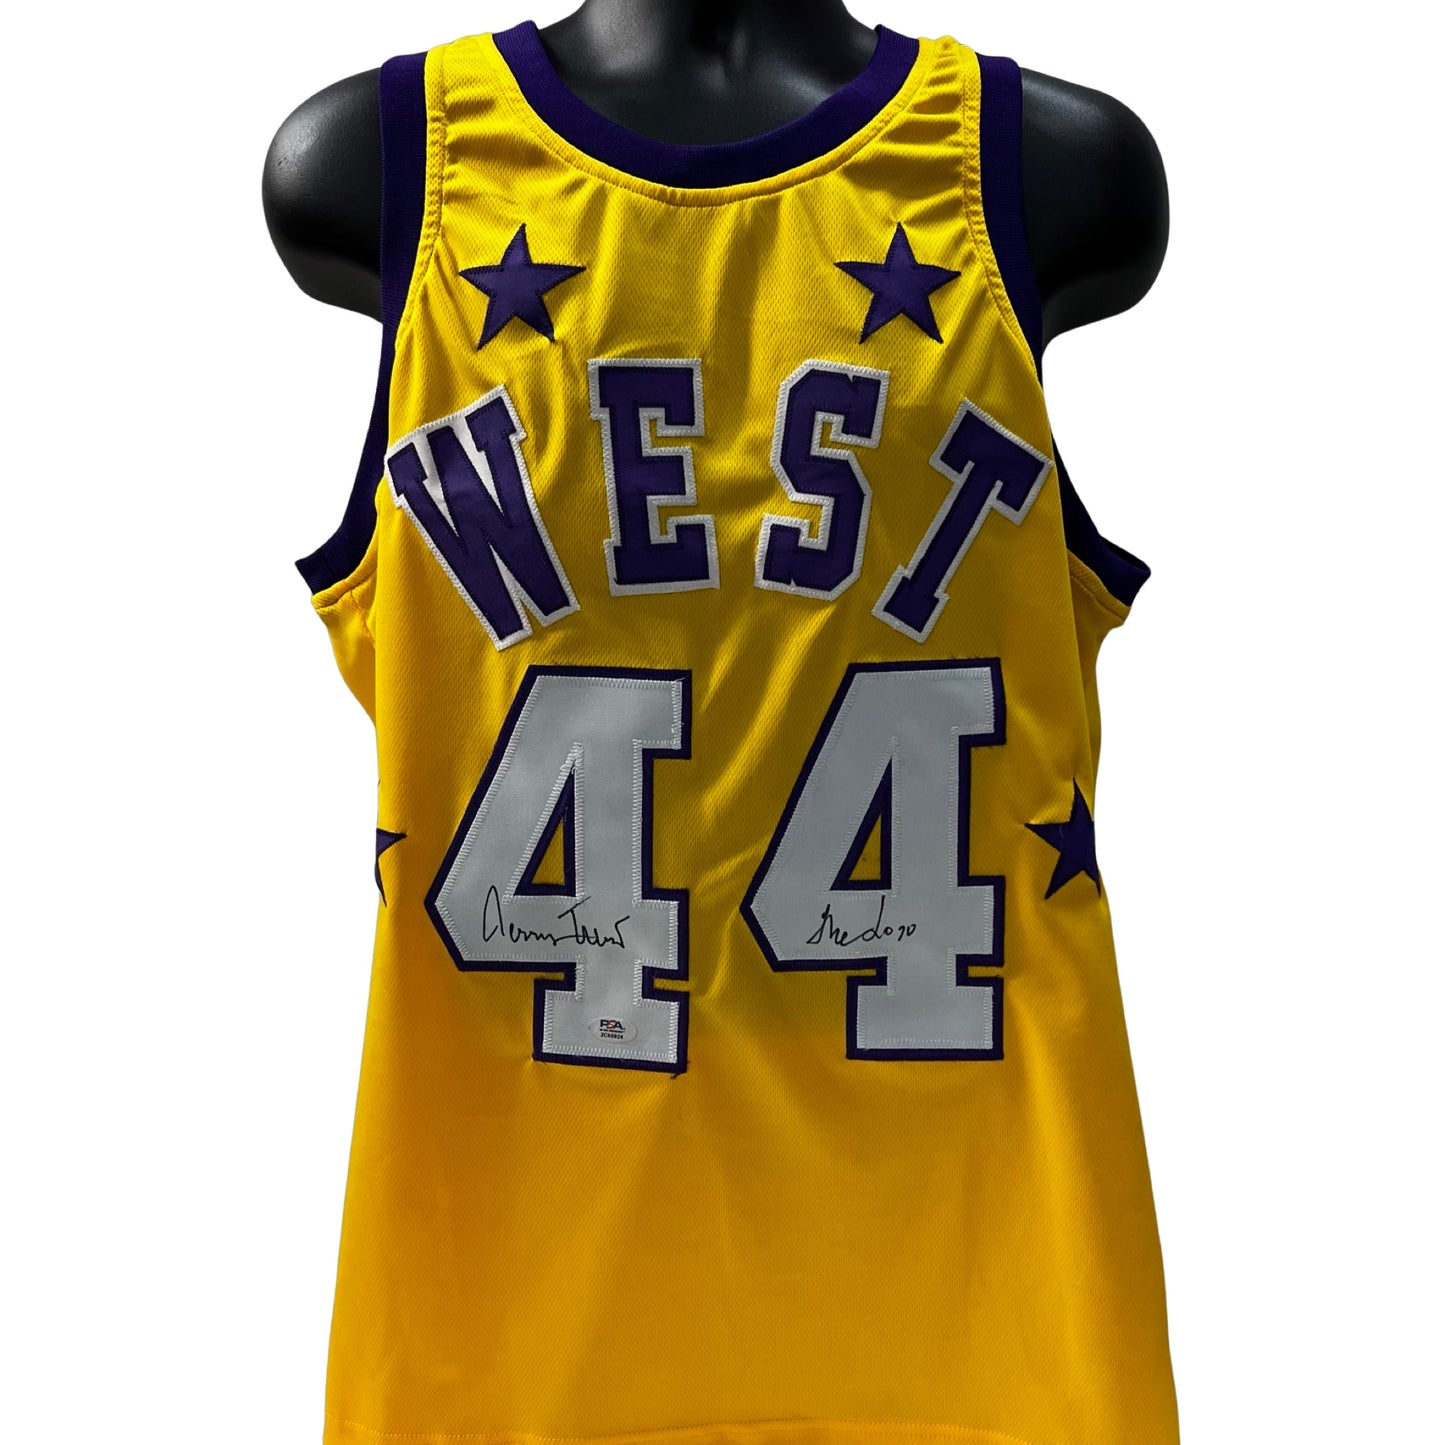 Jerry West Autographed Los Angeles Lakers Yellow All Star Jersey "The Logo" Inscription PSA